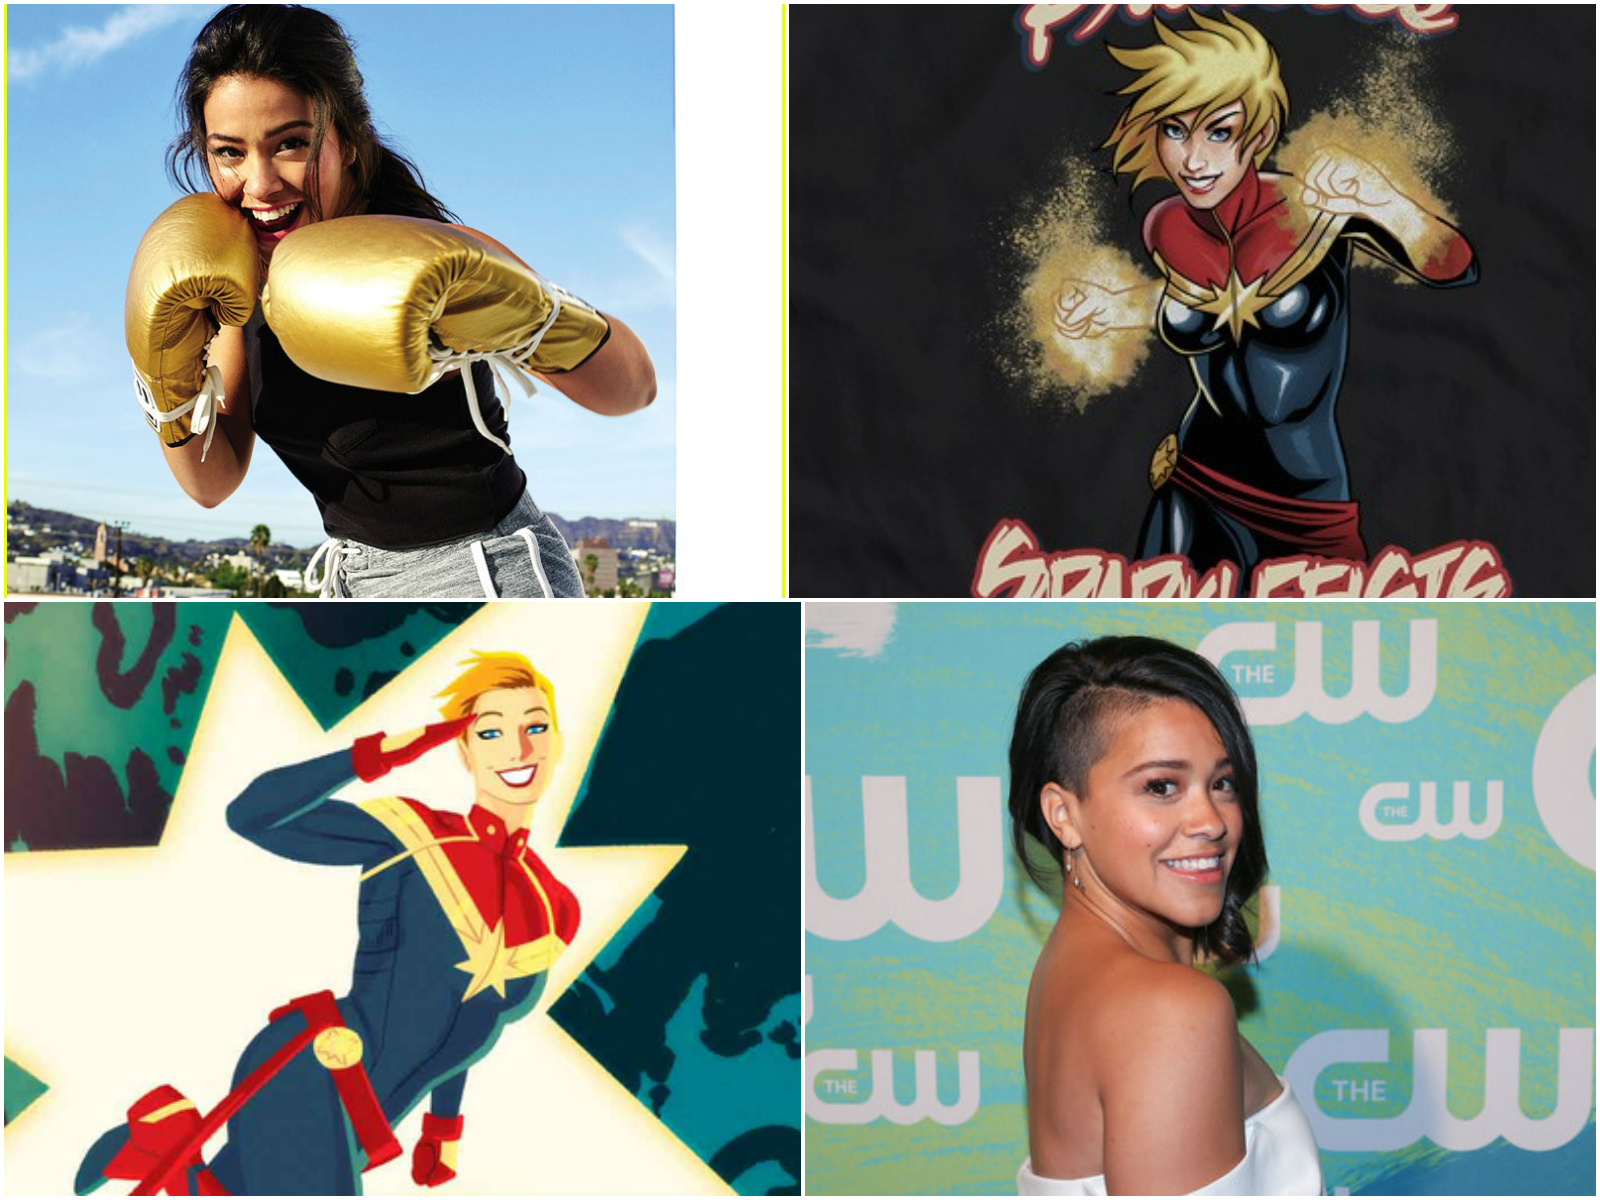 Who Should Star in the Captain Marvel Movie?